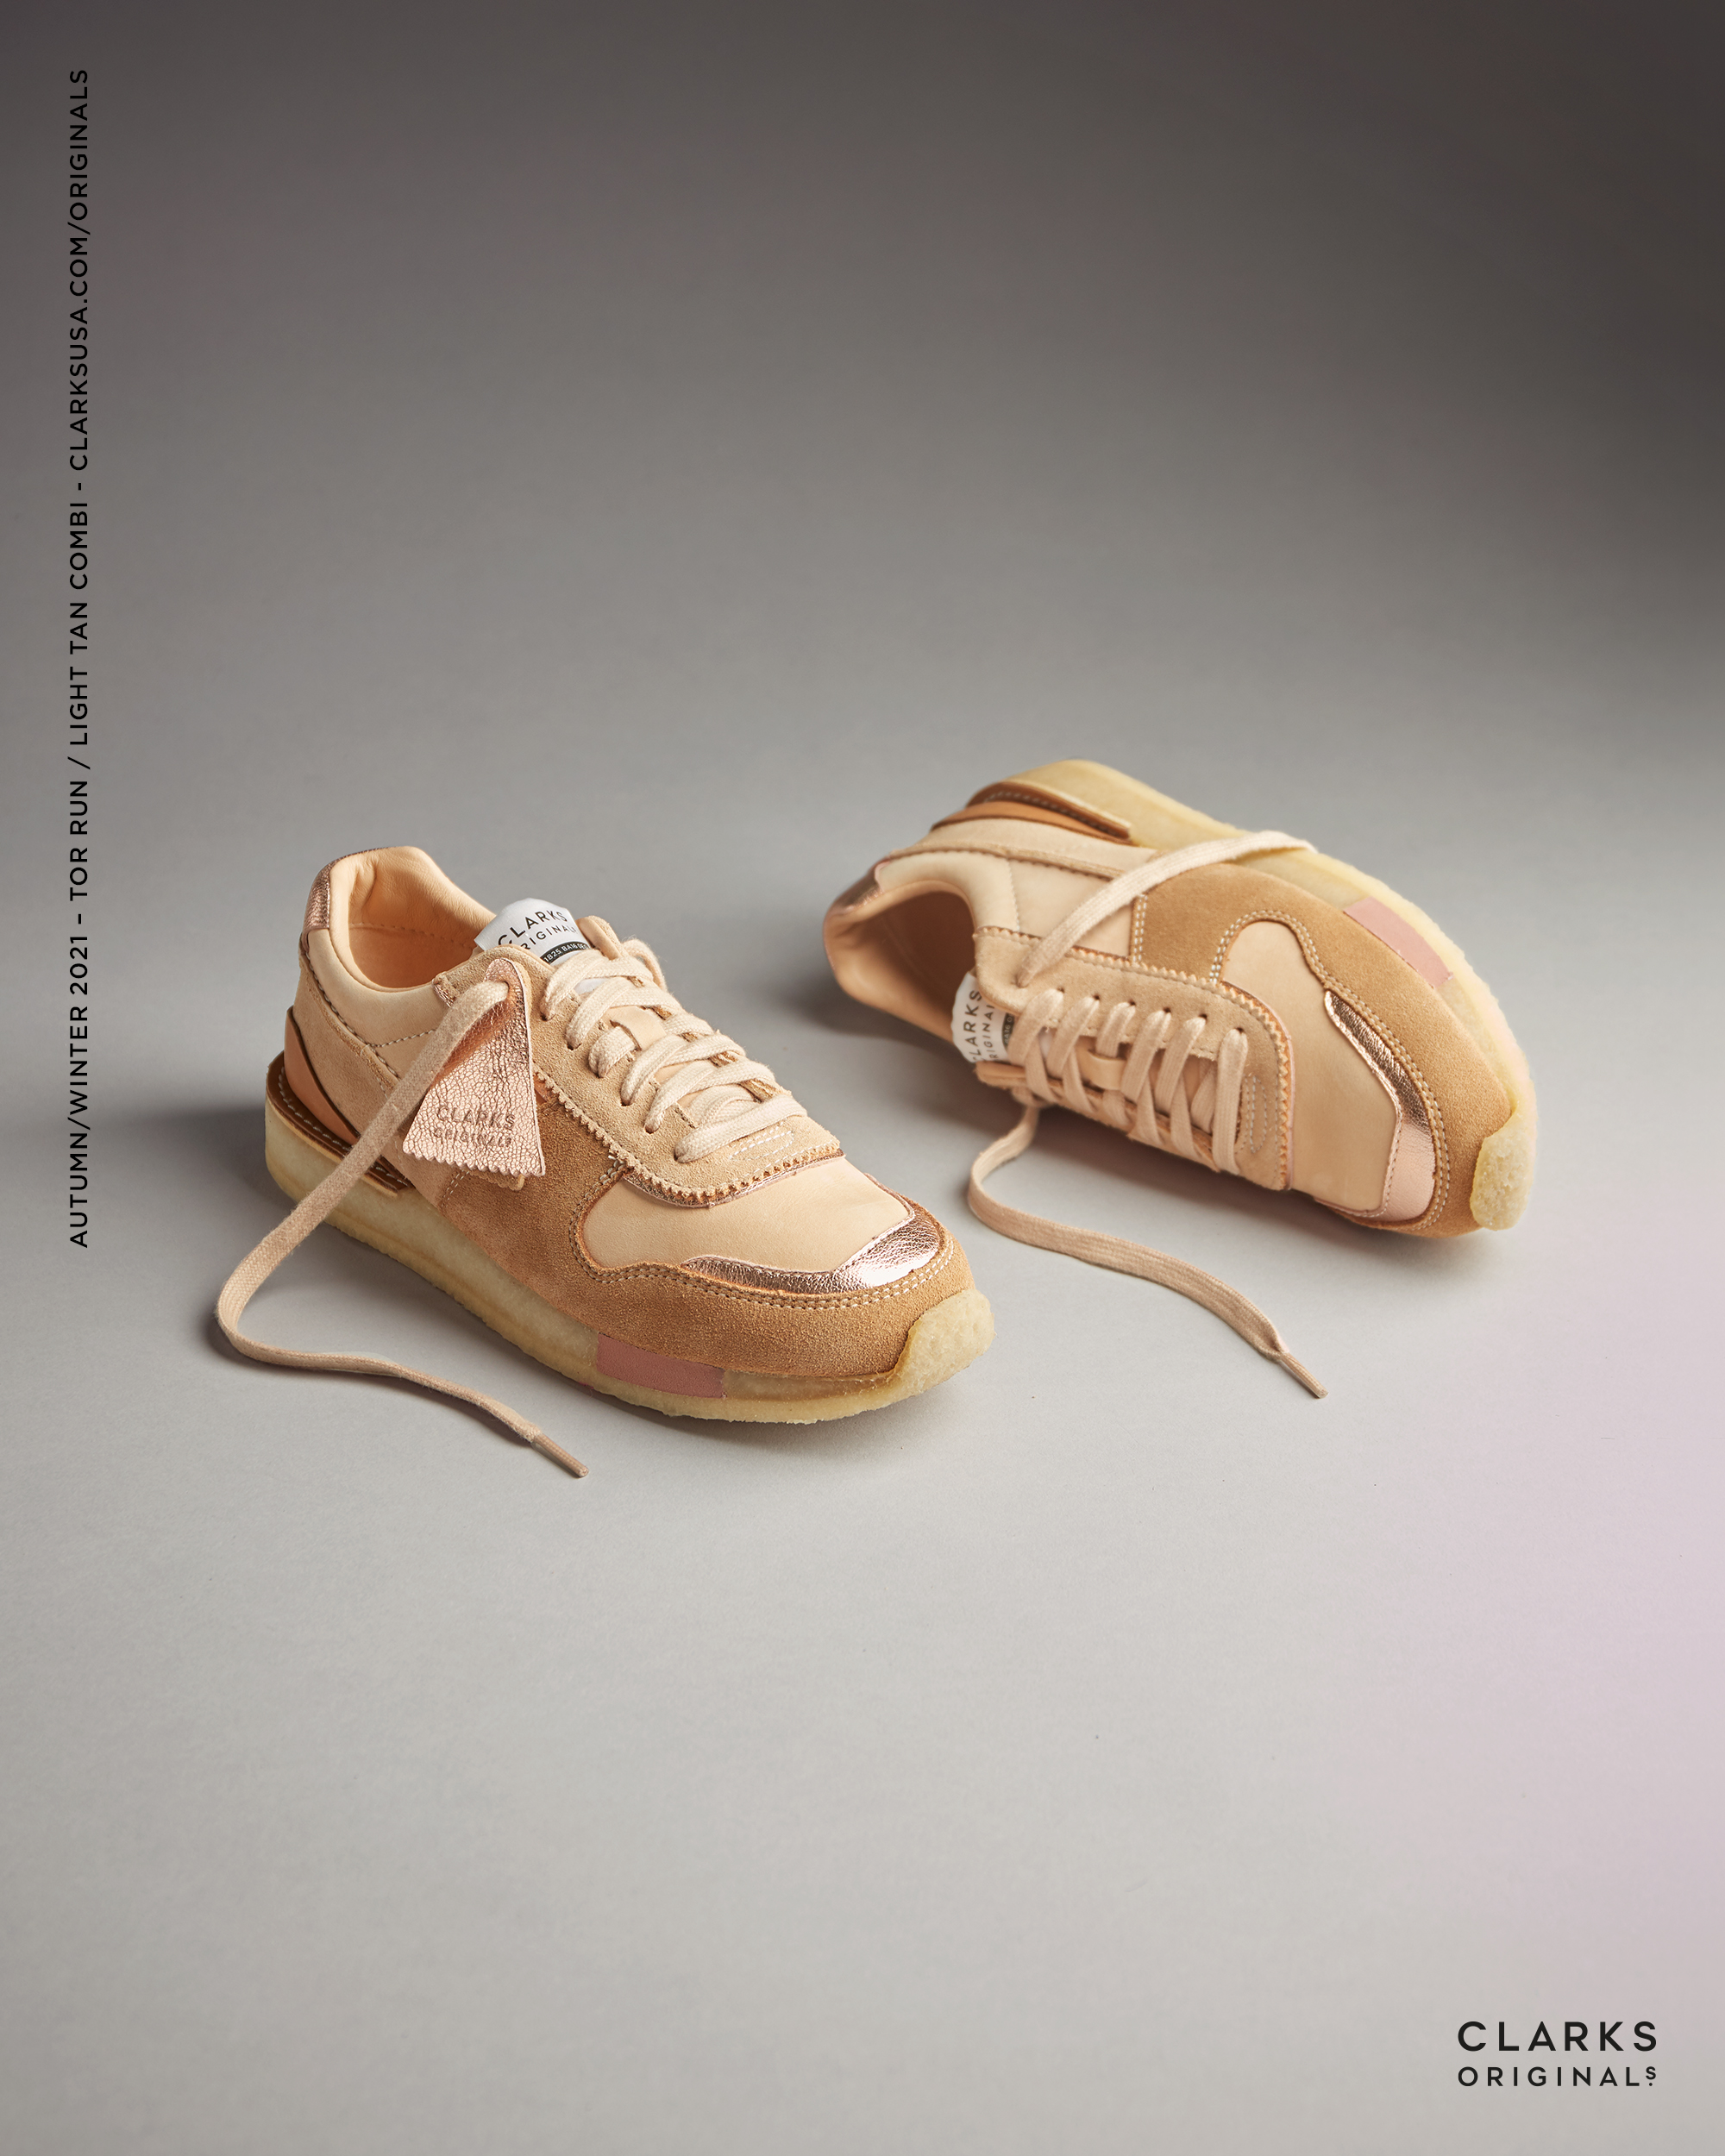 generatie Komkommer kennis Clarks Originals on Twitter: "Championing considered design, quality  materials and innovative technology, heritage-inspired Tor Run uses crafted  seams and colour detailing to create the ideal mix of style and comfort on a